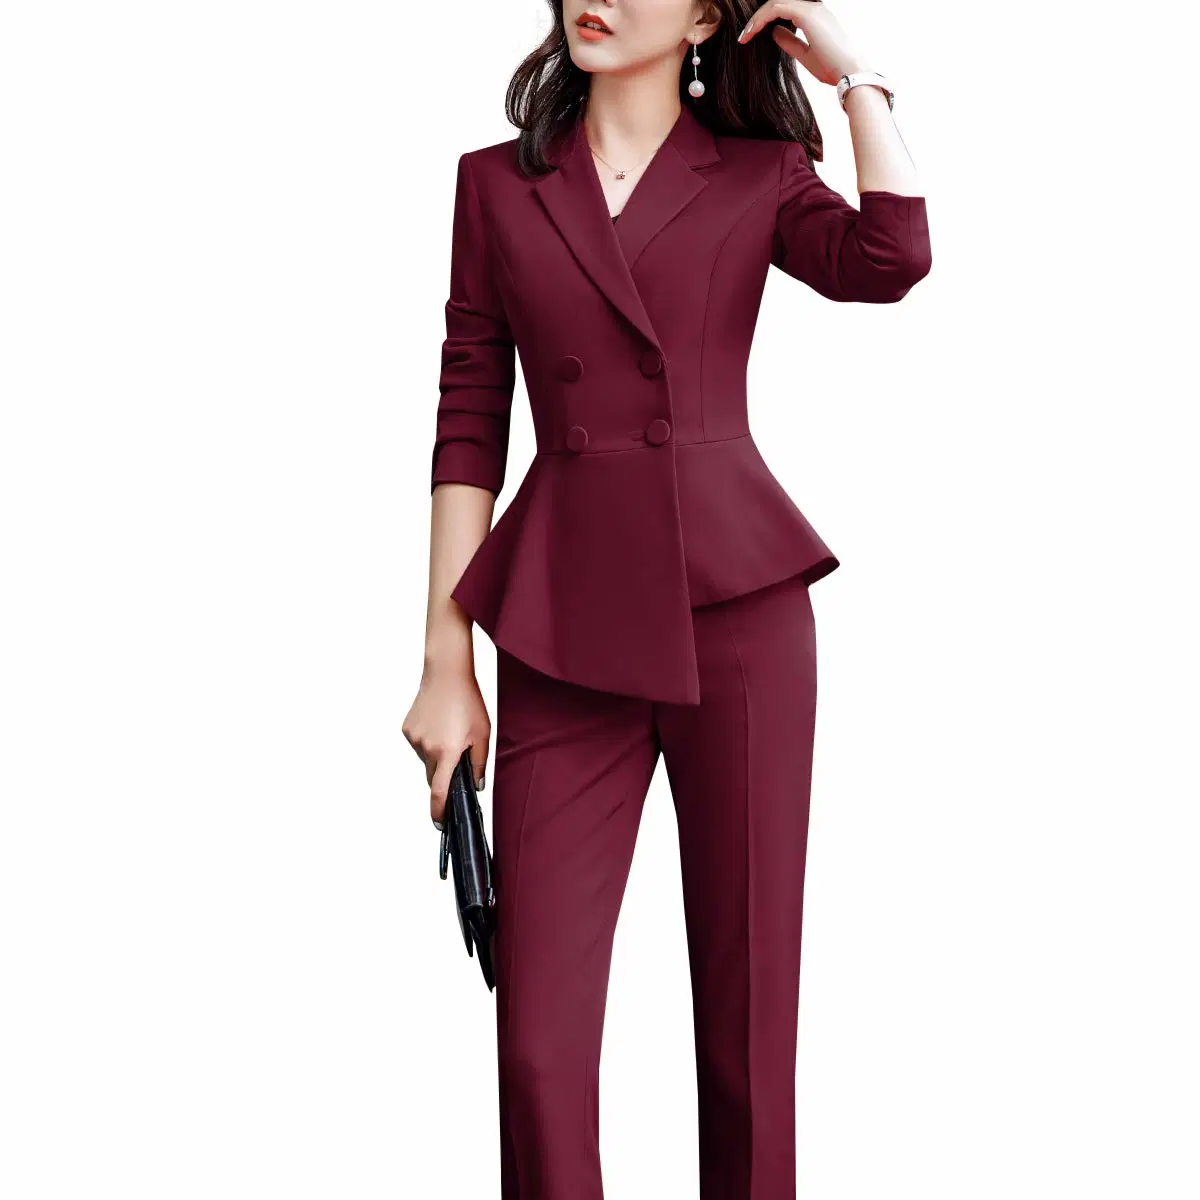 Women's Double Breasted 2 Piece Suit Set 2 Button Blazer Jacket and Pants